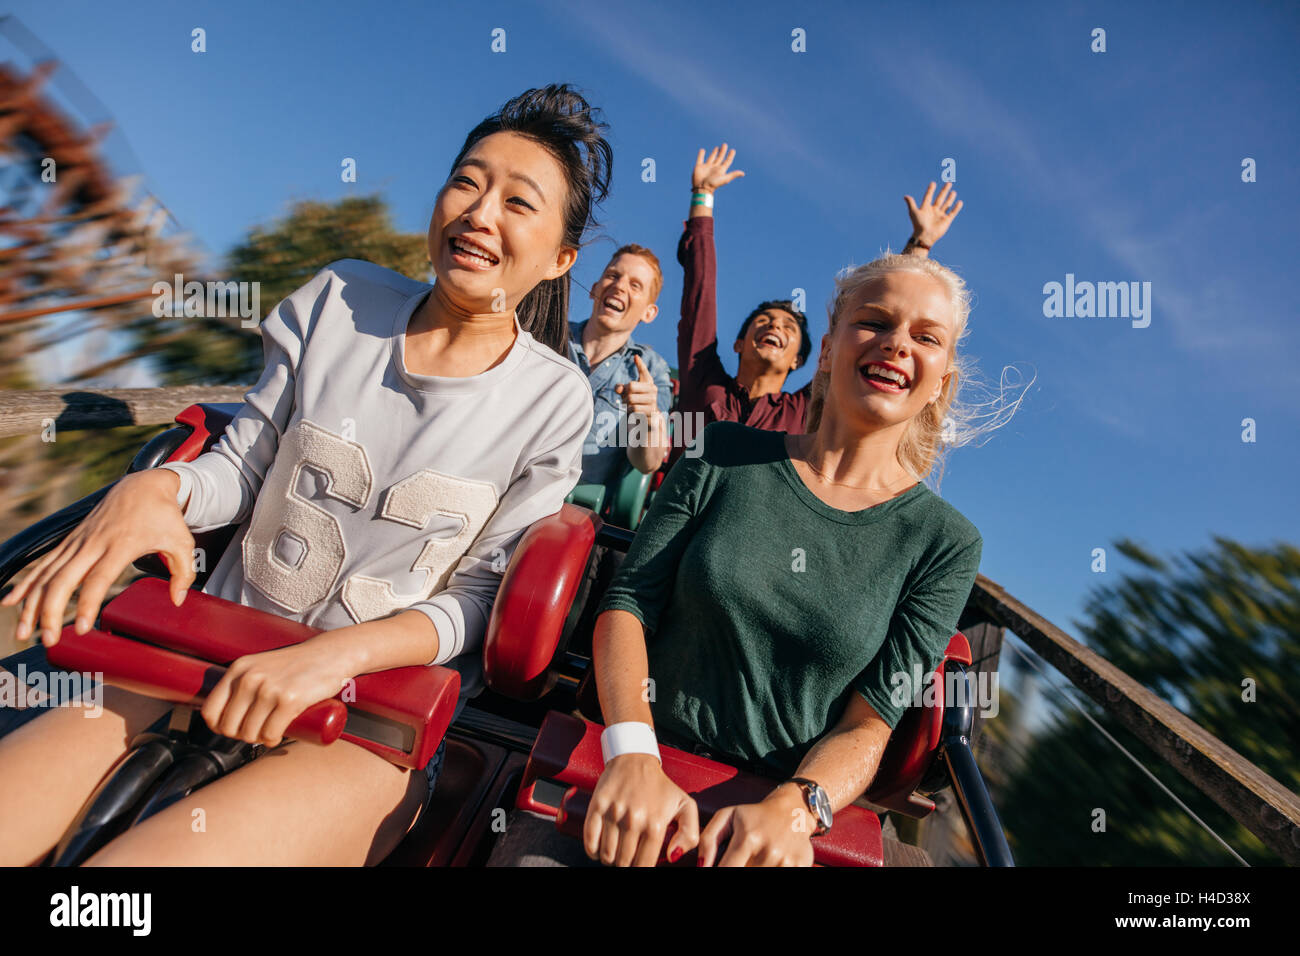 Young people on a thrilling roller coaster ride. Group of friends having fun at amusement park. Stock Photo